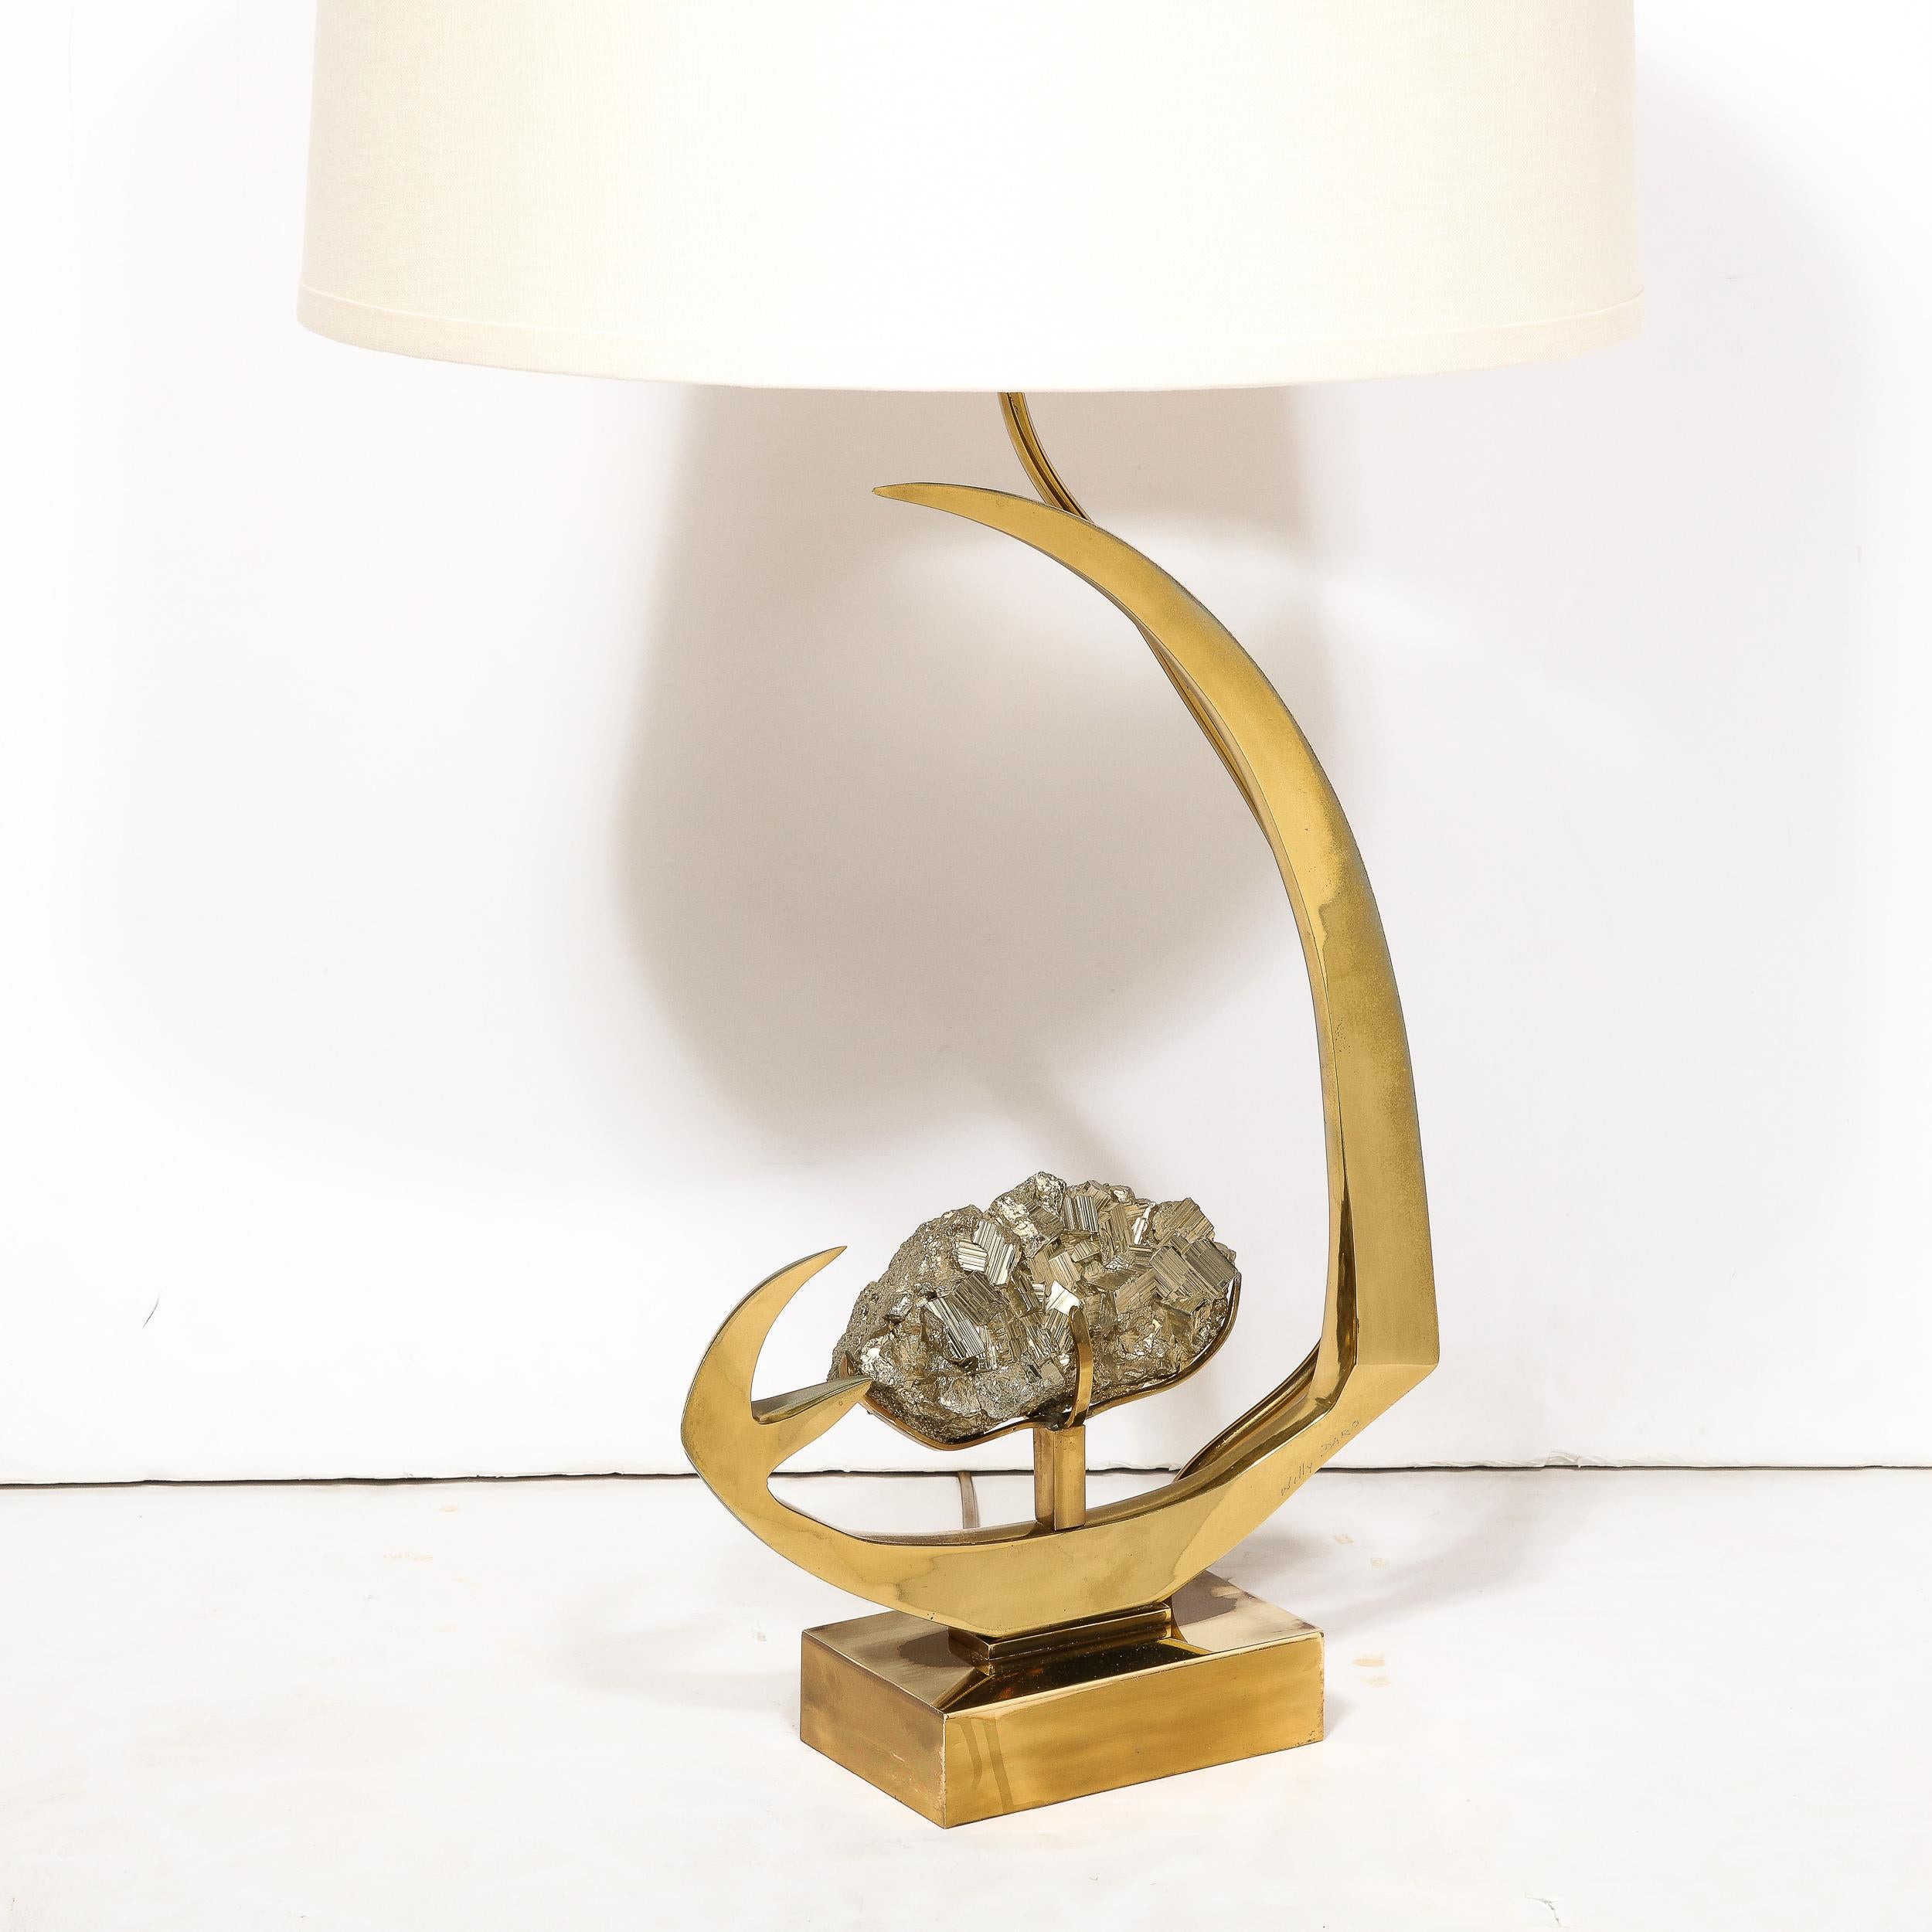 Late 20th Century Mid-Century Modern Sculptural Polished Brass & Pyrite Table Lamp by Willy Daro For Sale